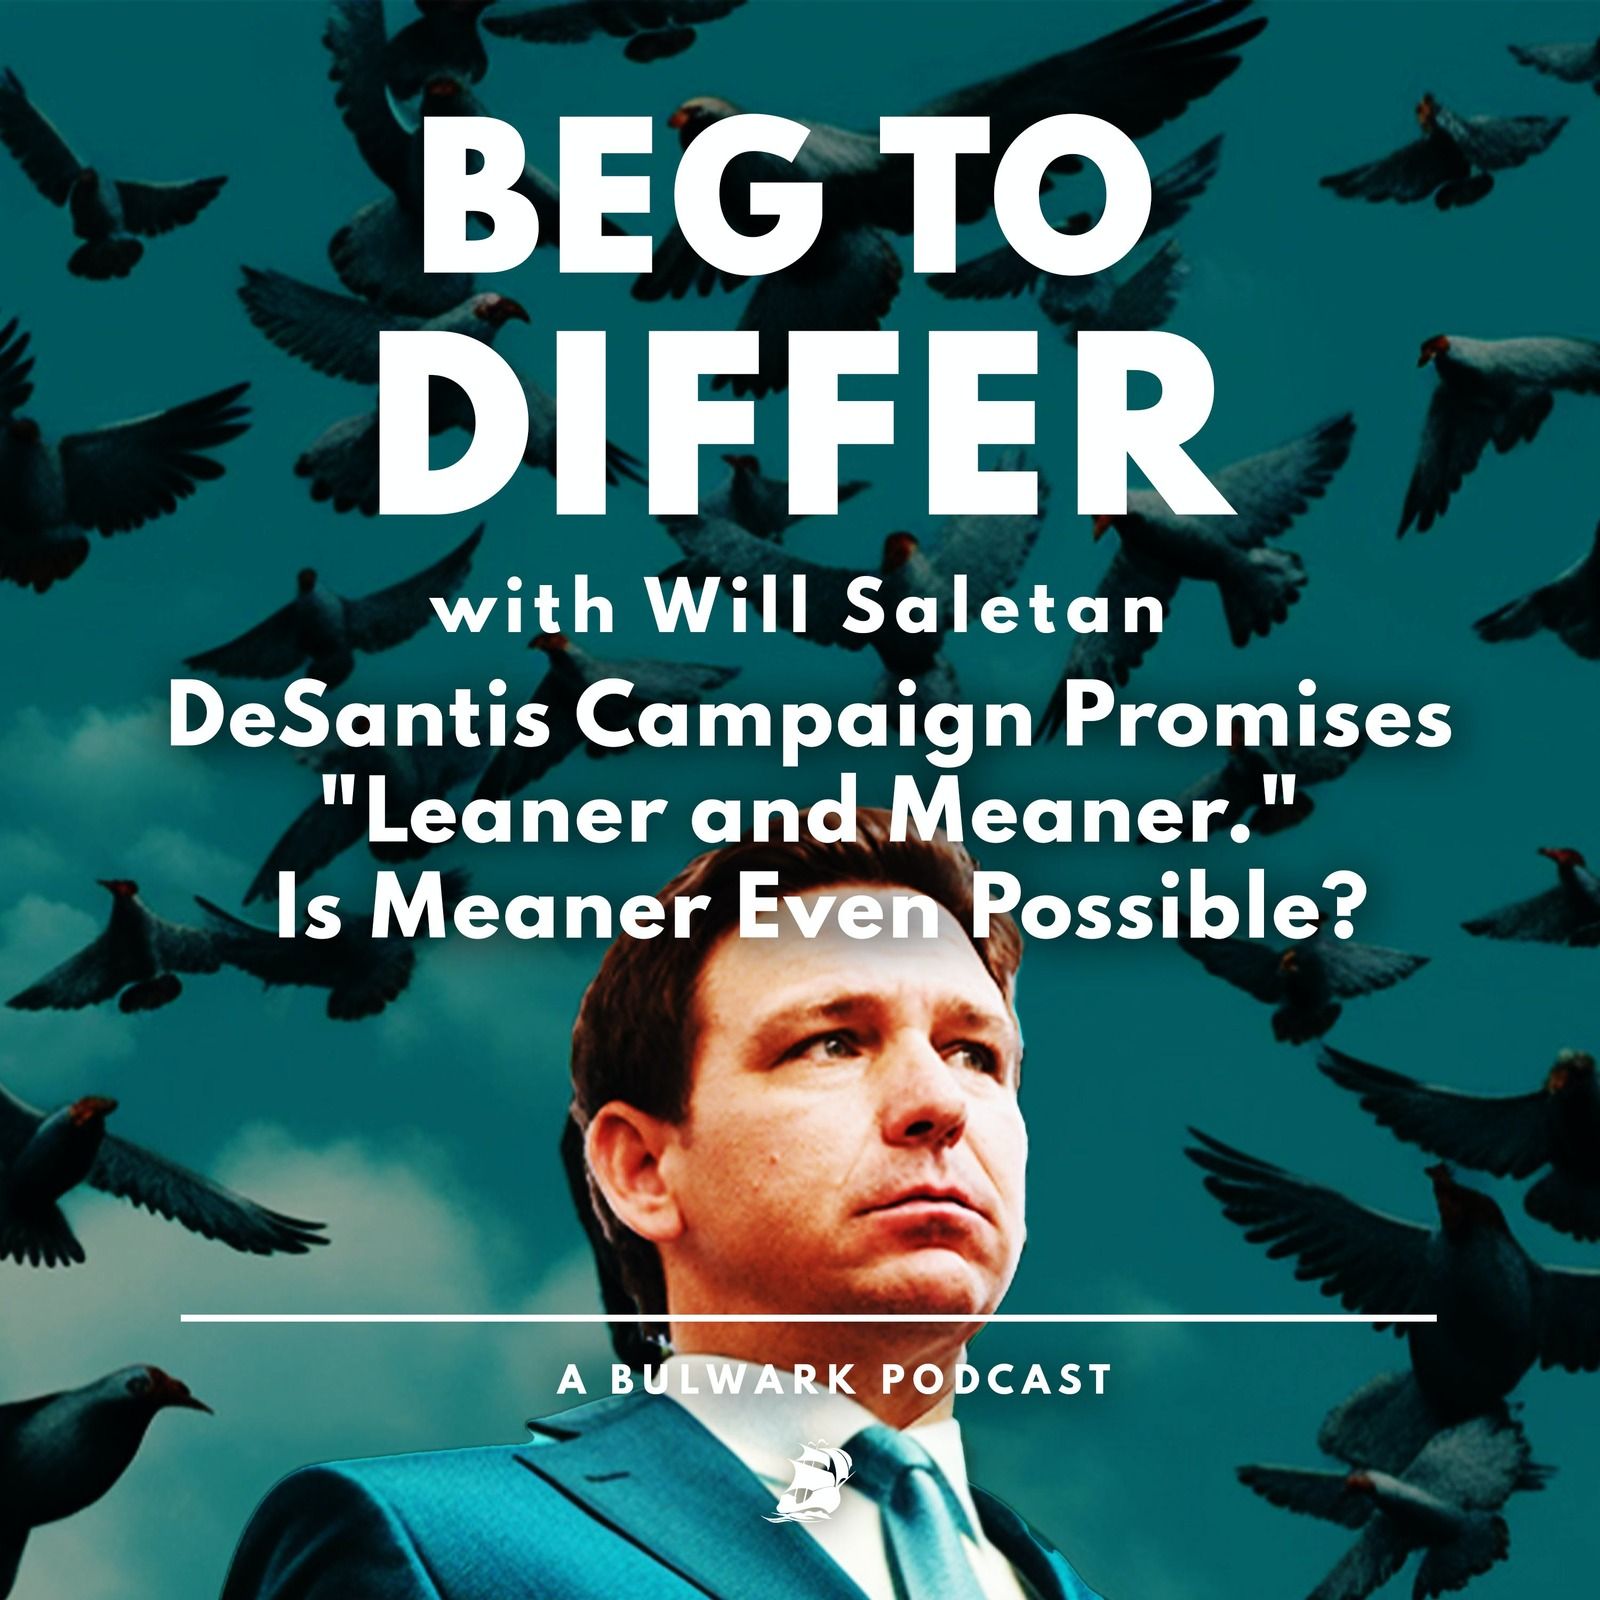 DeSantis Campaign Promises ”Leaner and Meaner.” Is Meaner Even Possible?